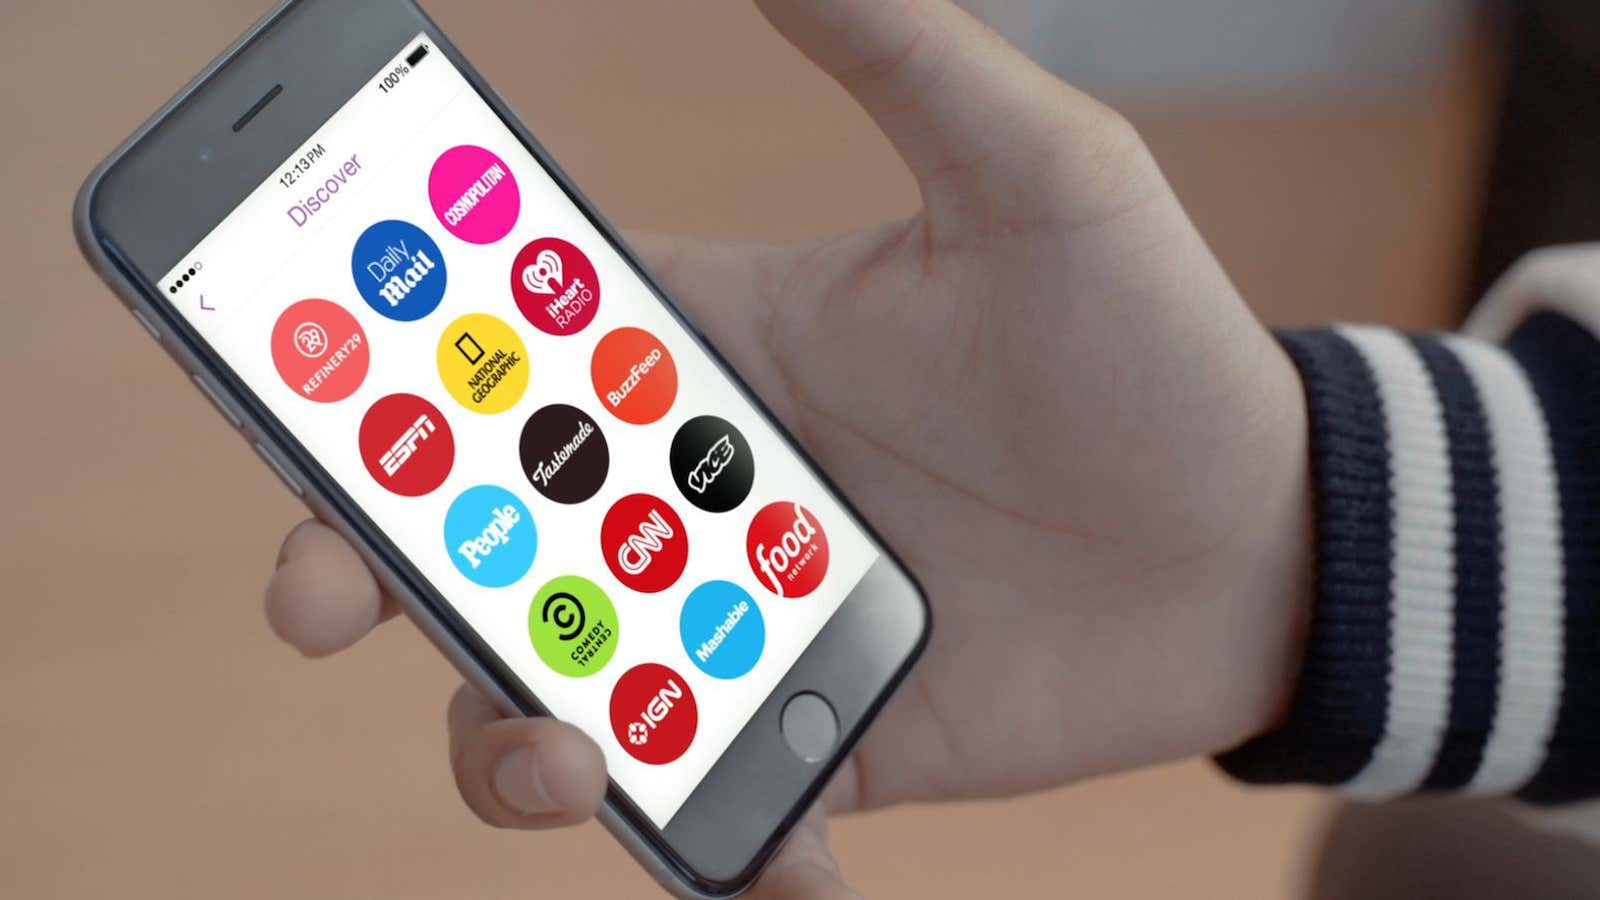 Will Snapchat’s users discover publishers?